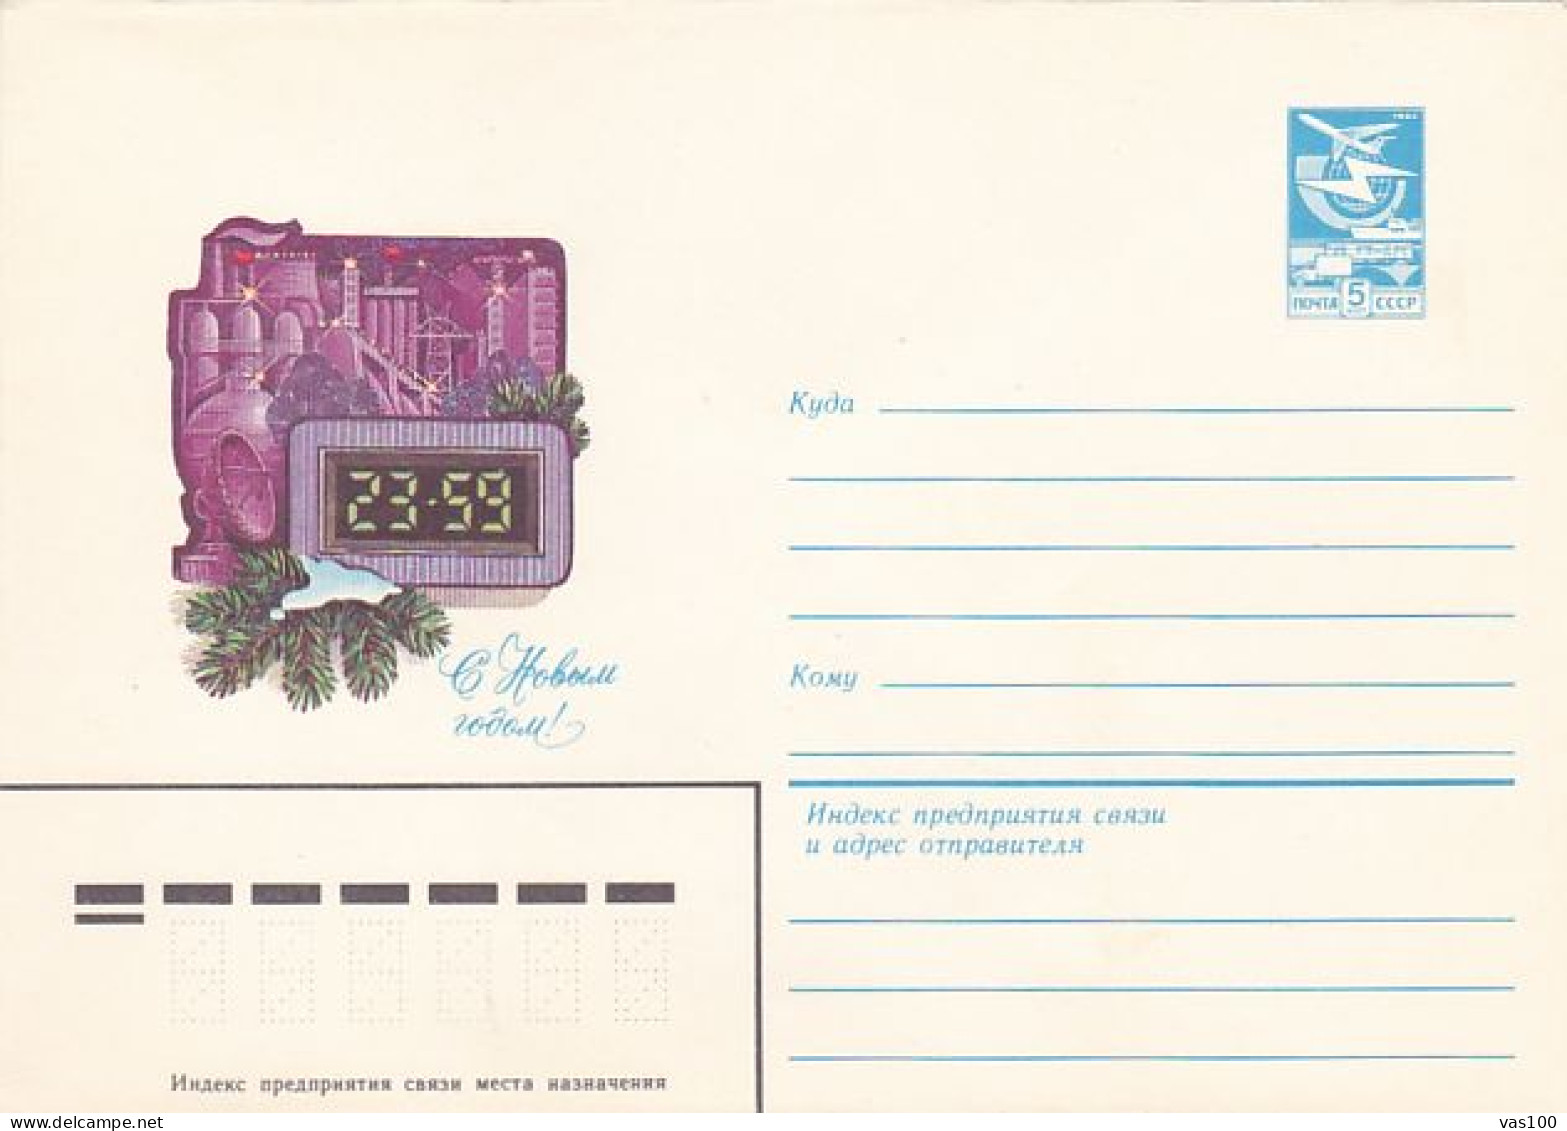 CLOCKS, NEW YEAR, COVER STATIONERY, ENTIER POSTAL, 1983, RUSSIA - Horlogerie